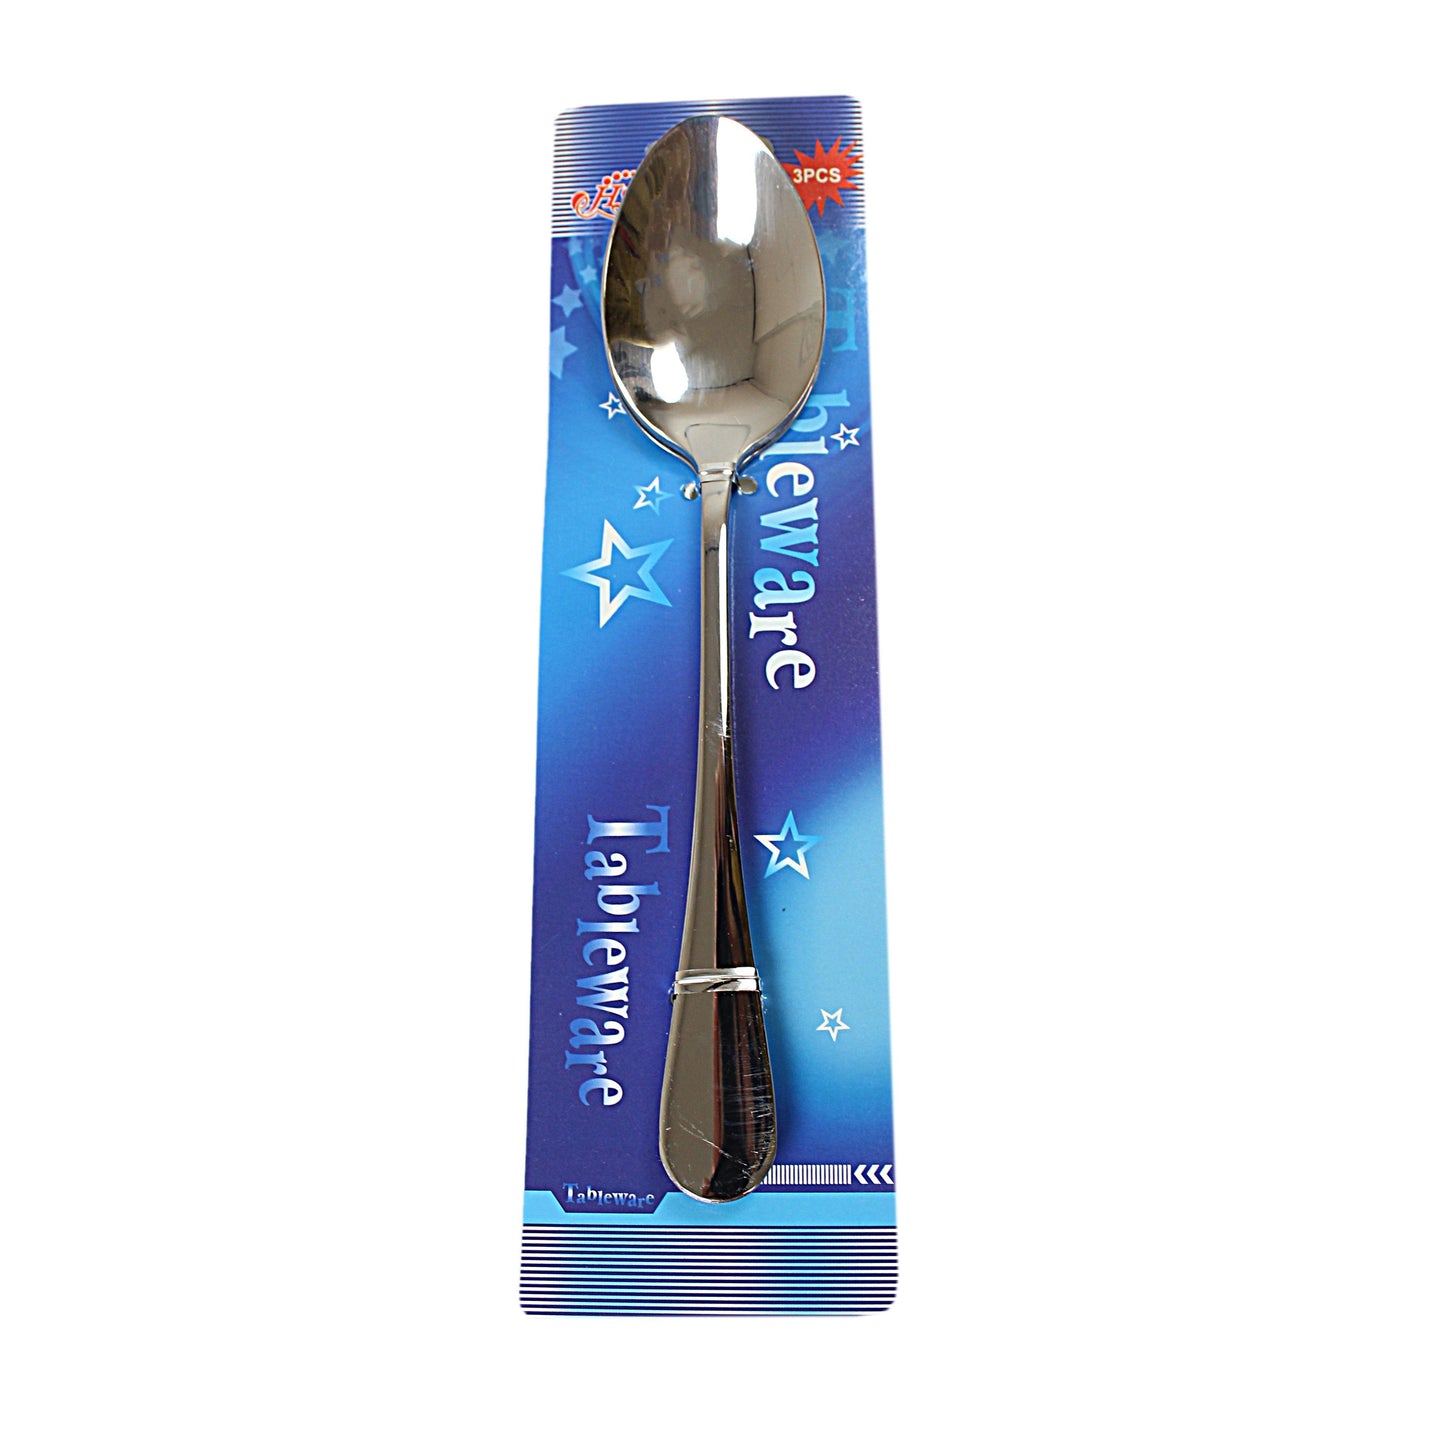 Stainless Steel Table Spoons 18.3 cm Pack of 3 0795 (Large Letter Rate)